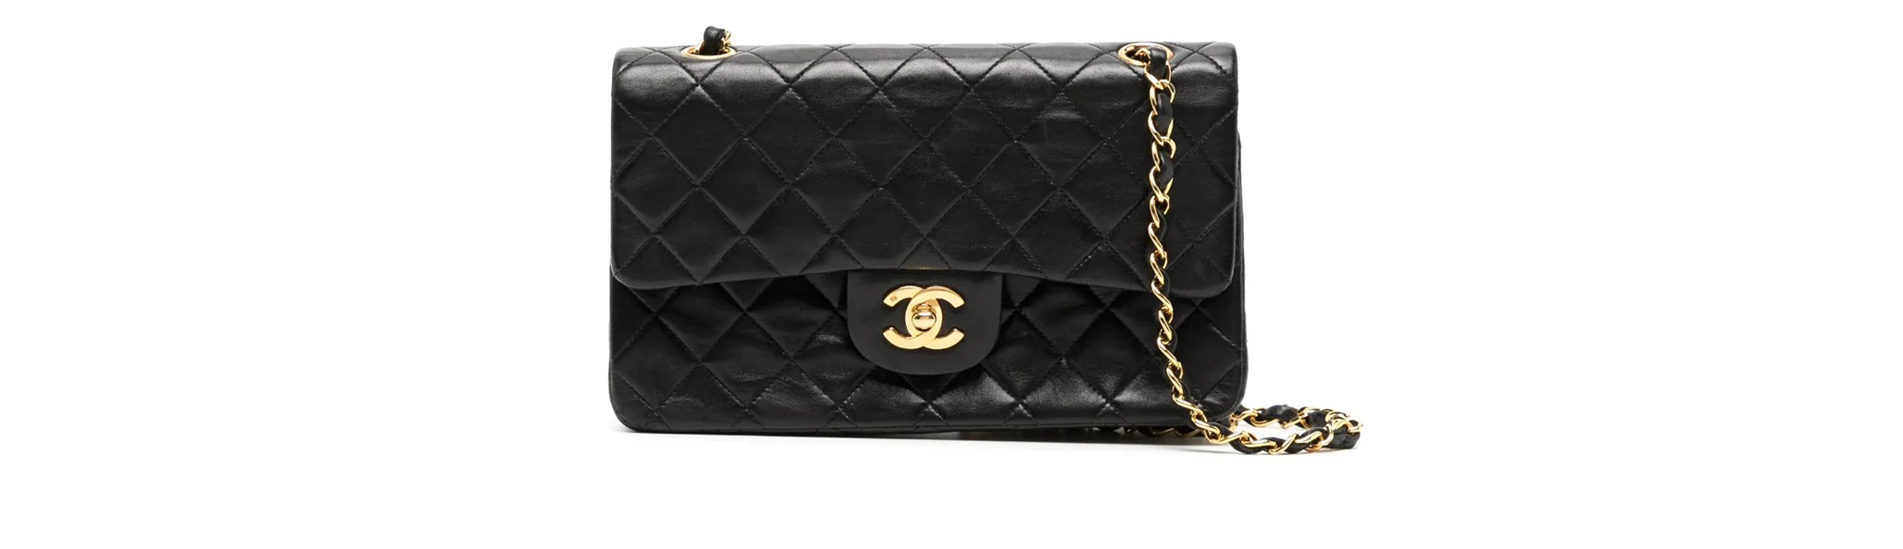 CHANEL FLAP BAG SIZE GUIDE